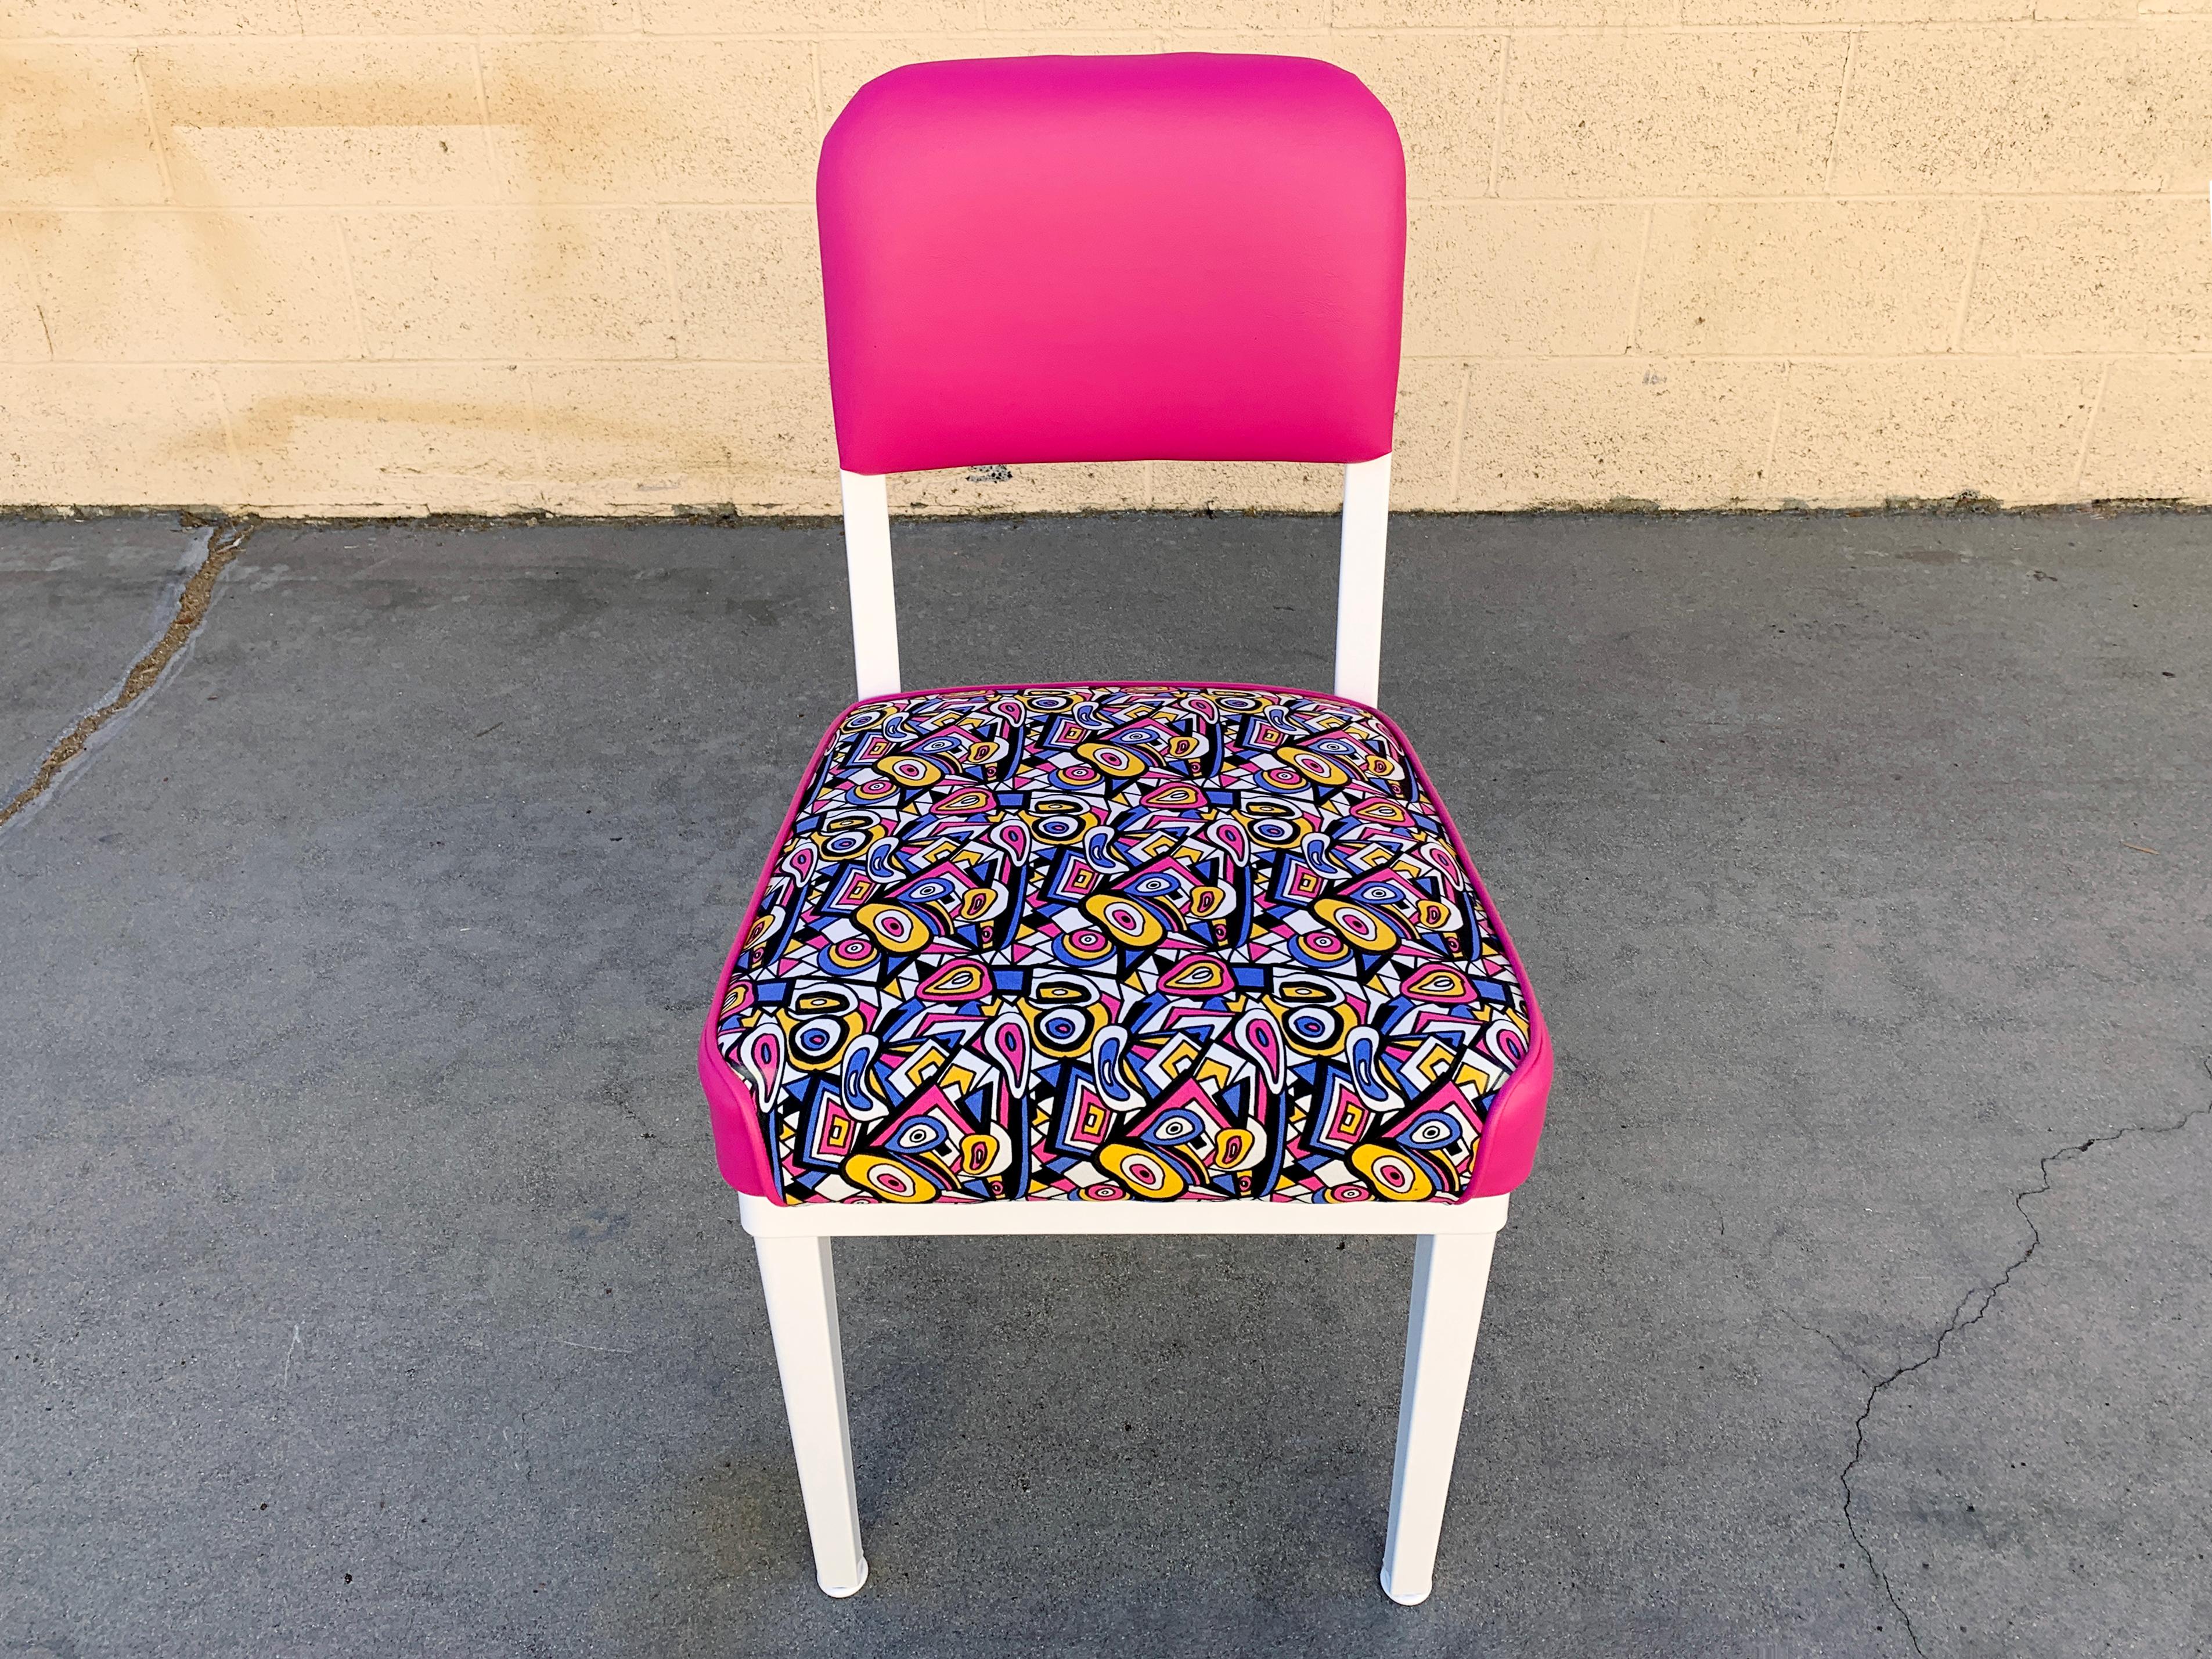 Super cute 1960s McDowell Craig steel side chair, totally refinished. We painted the frame in a gloss white powder coat and upholstered the seat in a retro style op-art fabric with pink vinyl backrest and cushion sides. It's groovy baby! Excellent